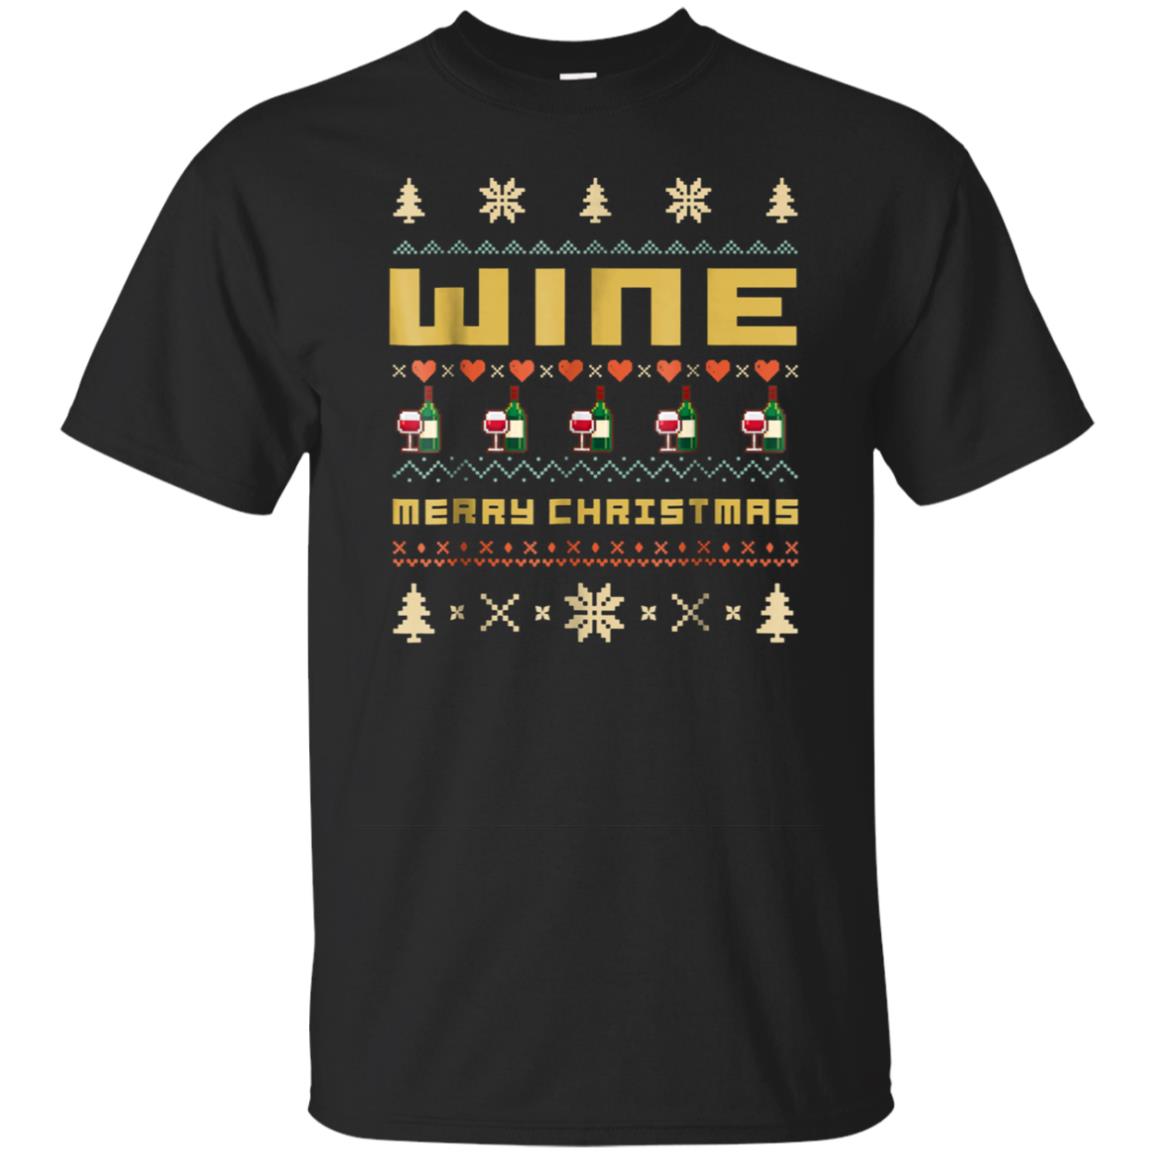 Merry Christmas Wine Funny T-shirt Gift For Special Days